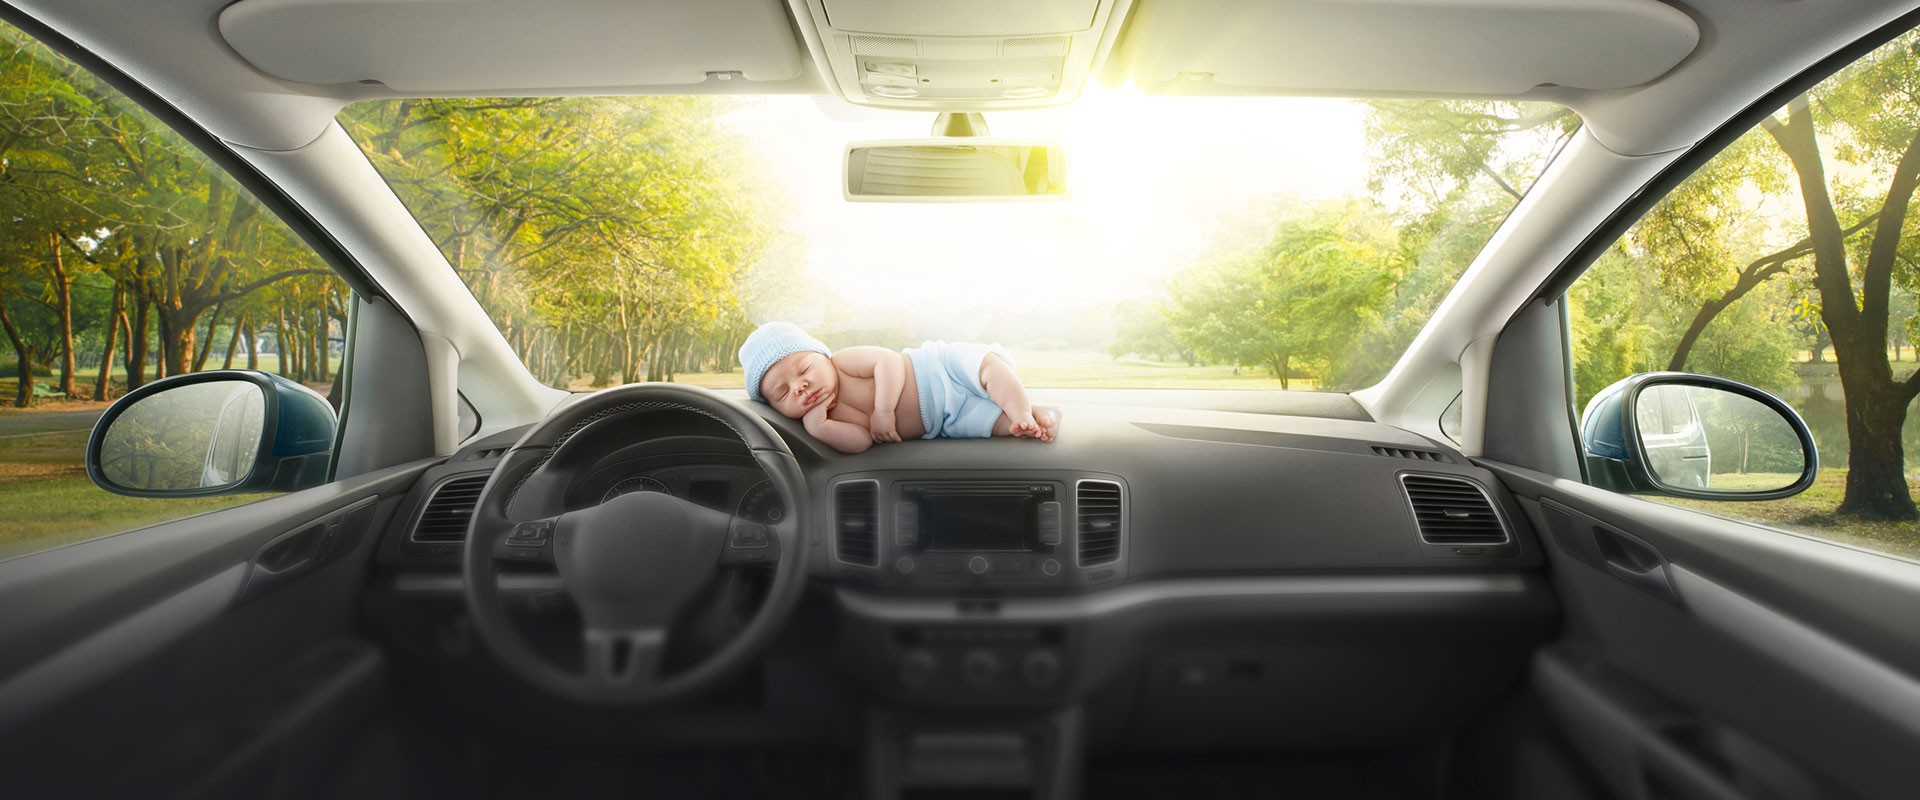 Sleeping baby lying on instrument paneling of a standing car